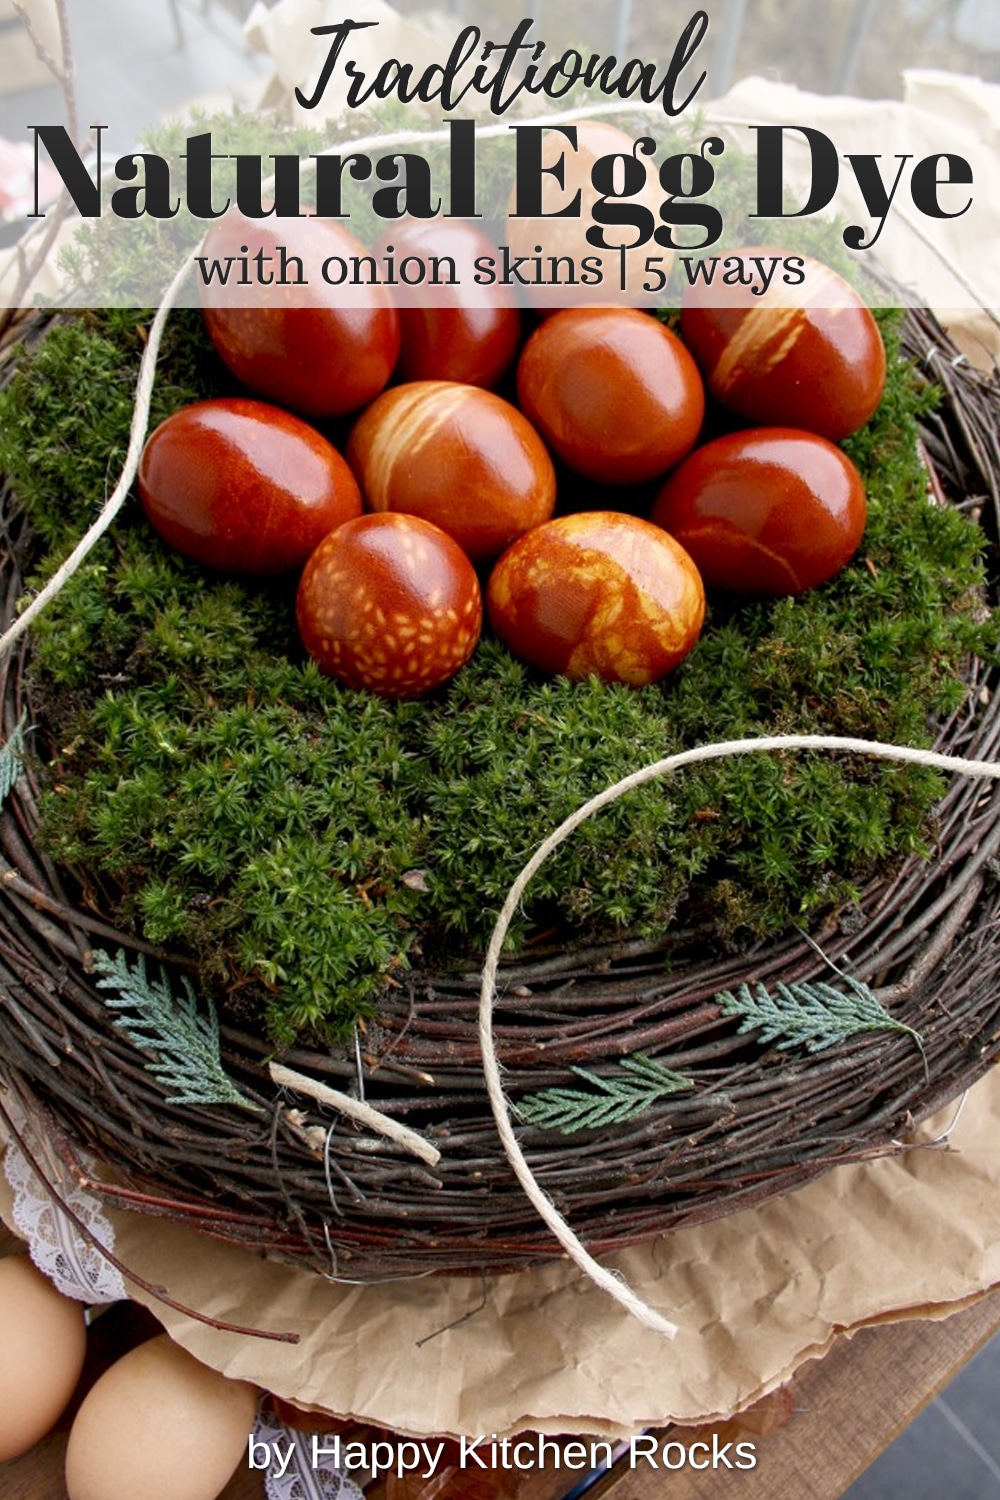 Natural Egg Dye with Onion Skins 5 Ways Collage with Text Overlay